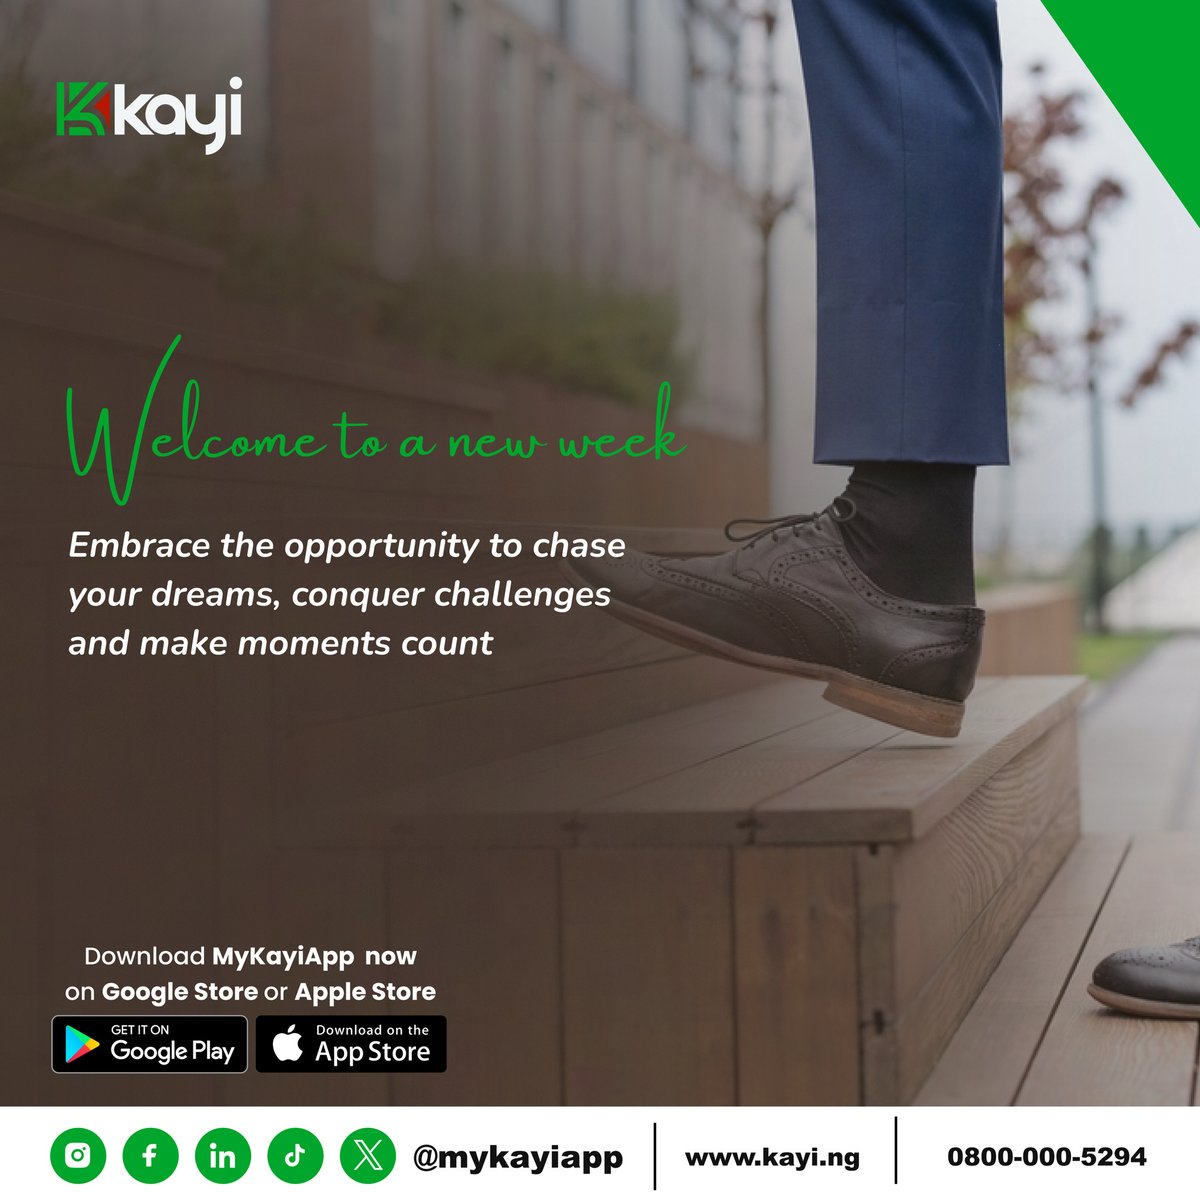 New week, new goals! Embrace the opportunity to chase your dreams, conquer challenges, and make every moment count. You've got this!

#MondayMotivation 
#DreamBig #MakeItHappen
#Mykayiapp
#Kayiway
#Digitalbanking